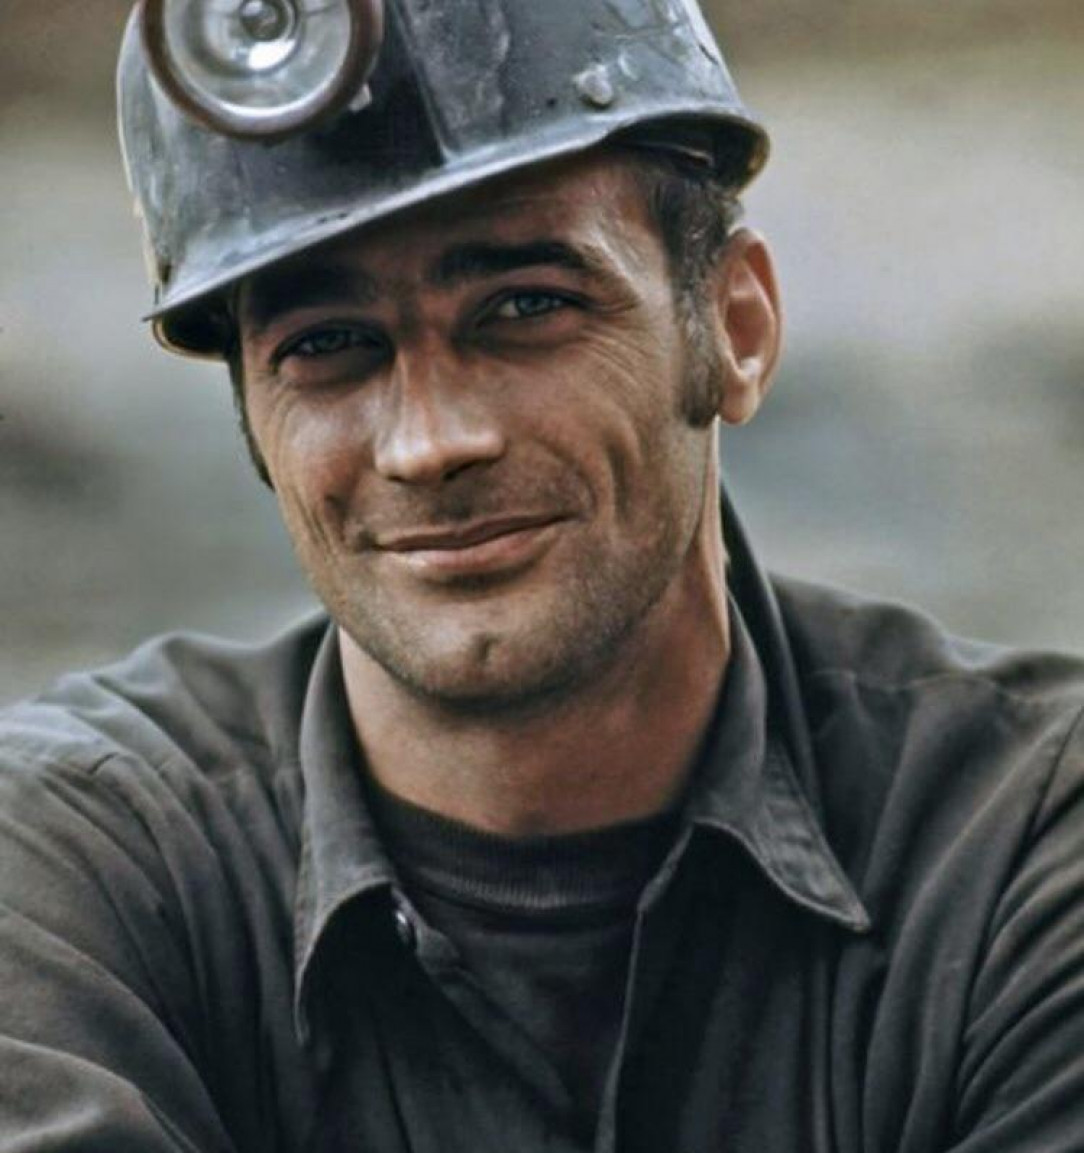 A miner waiting to go to work during the night shift at the Virginia- Pocahontas Coal Company mine, 1974